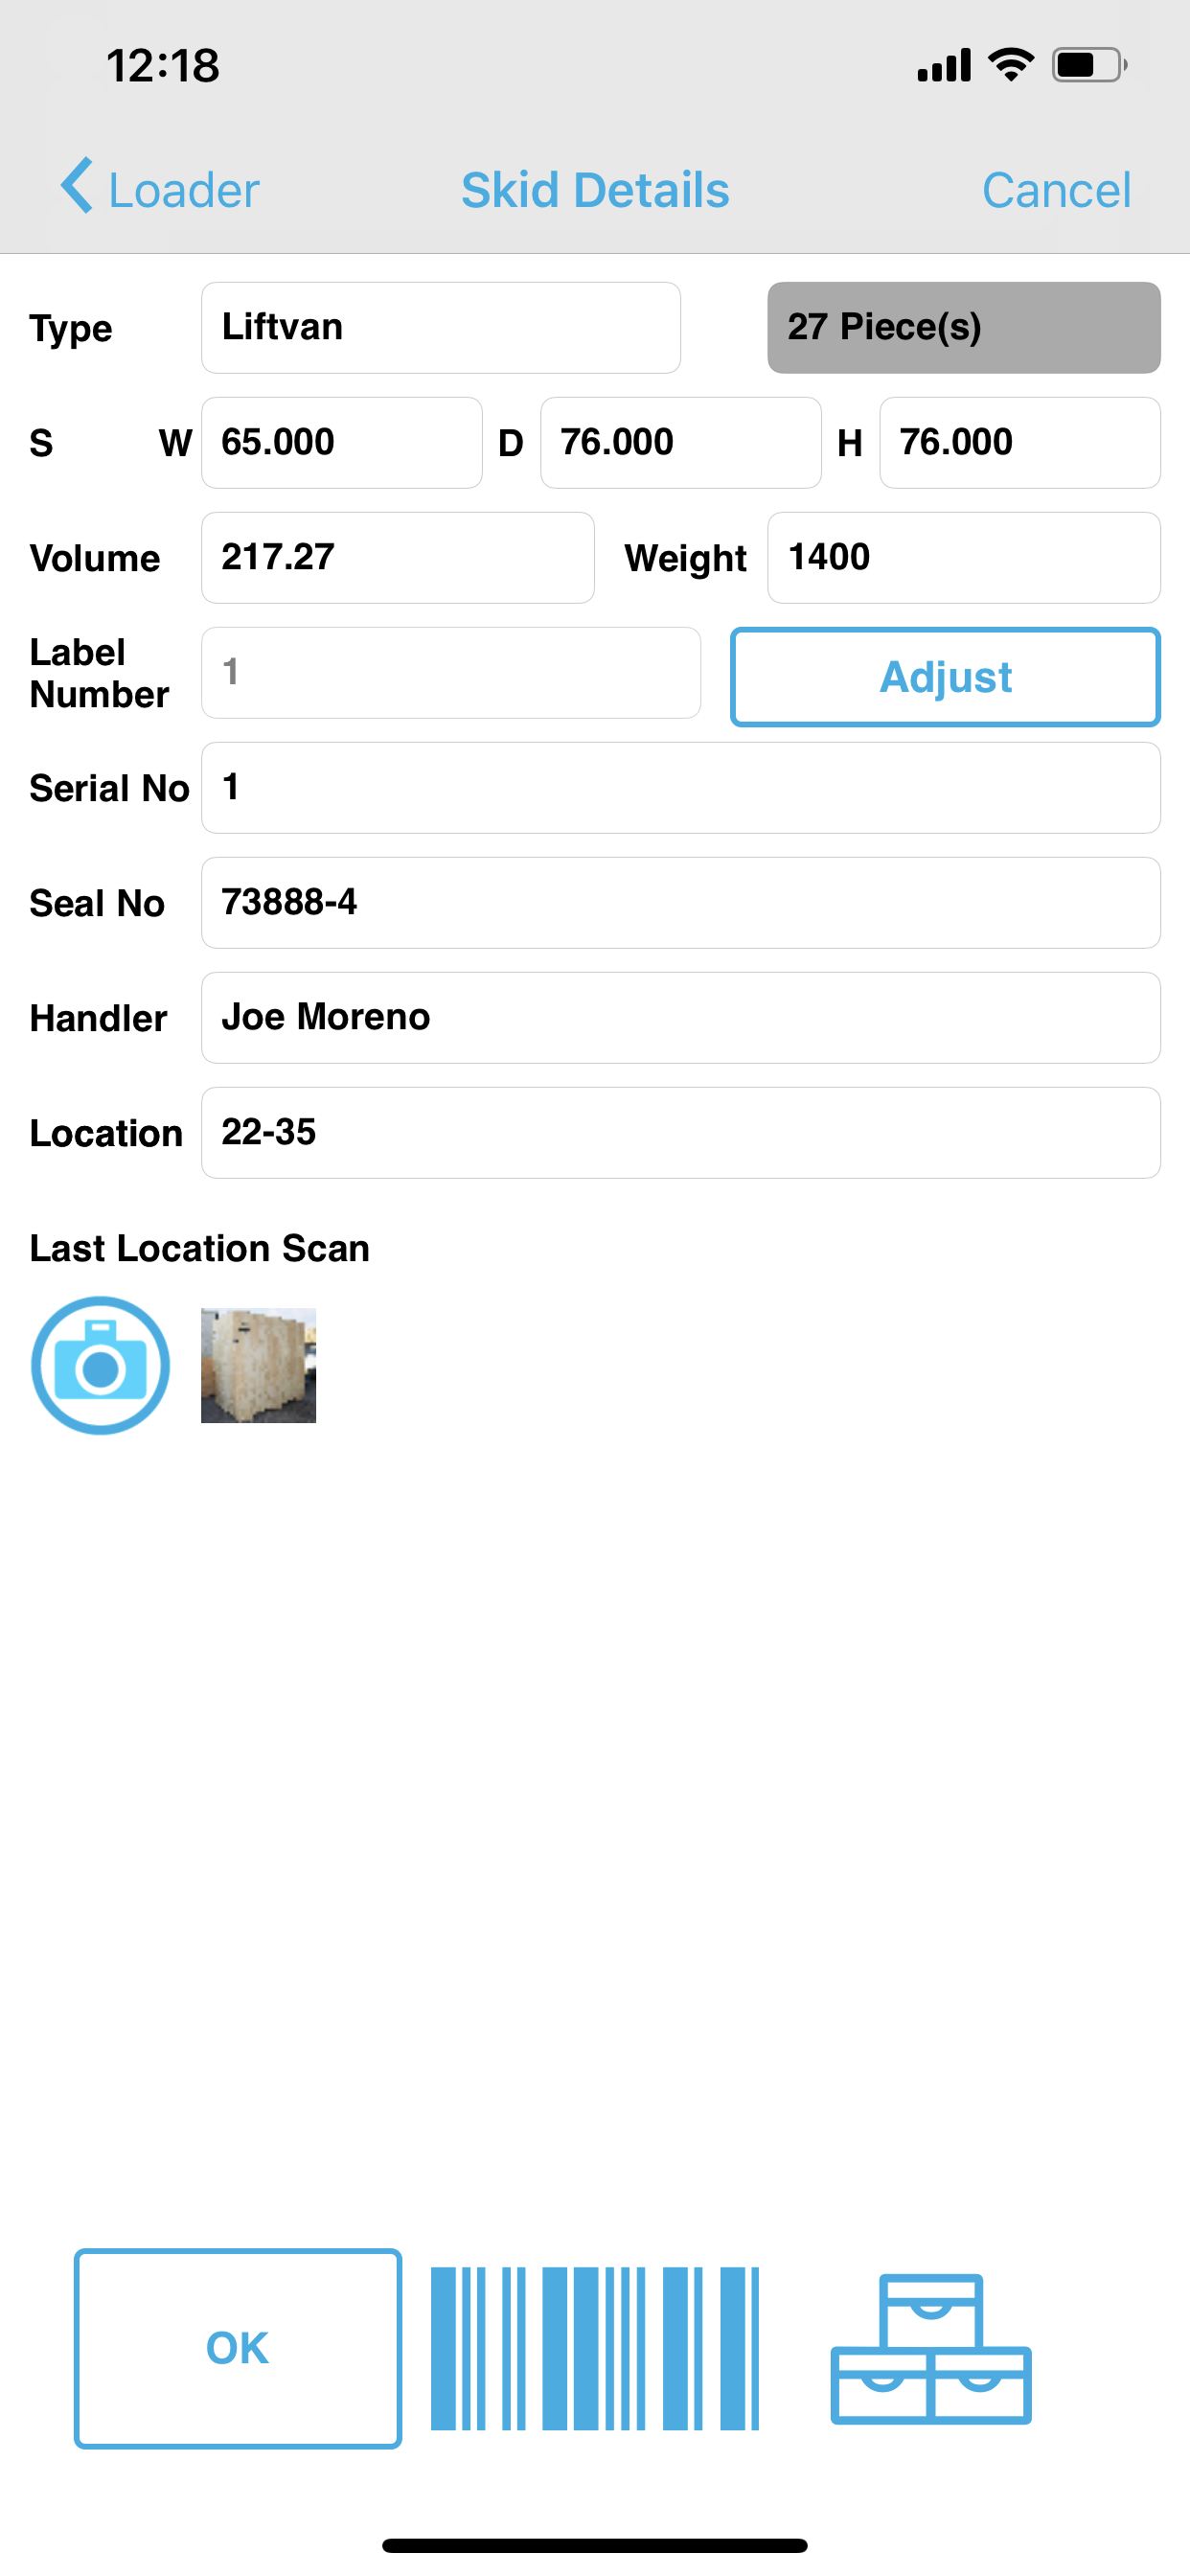 Voxme inventory system now allows barcode based liftvan tracking